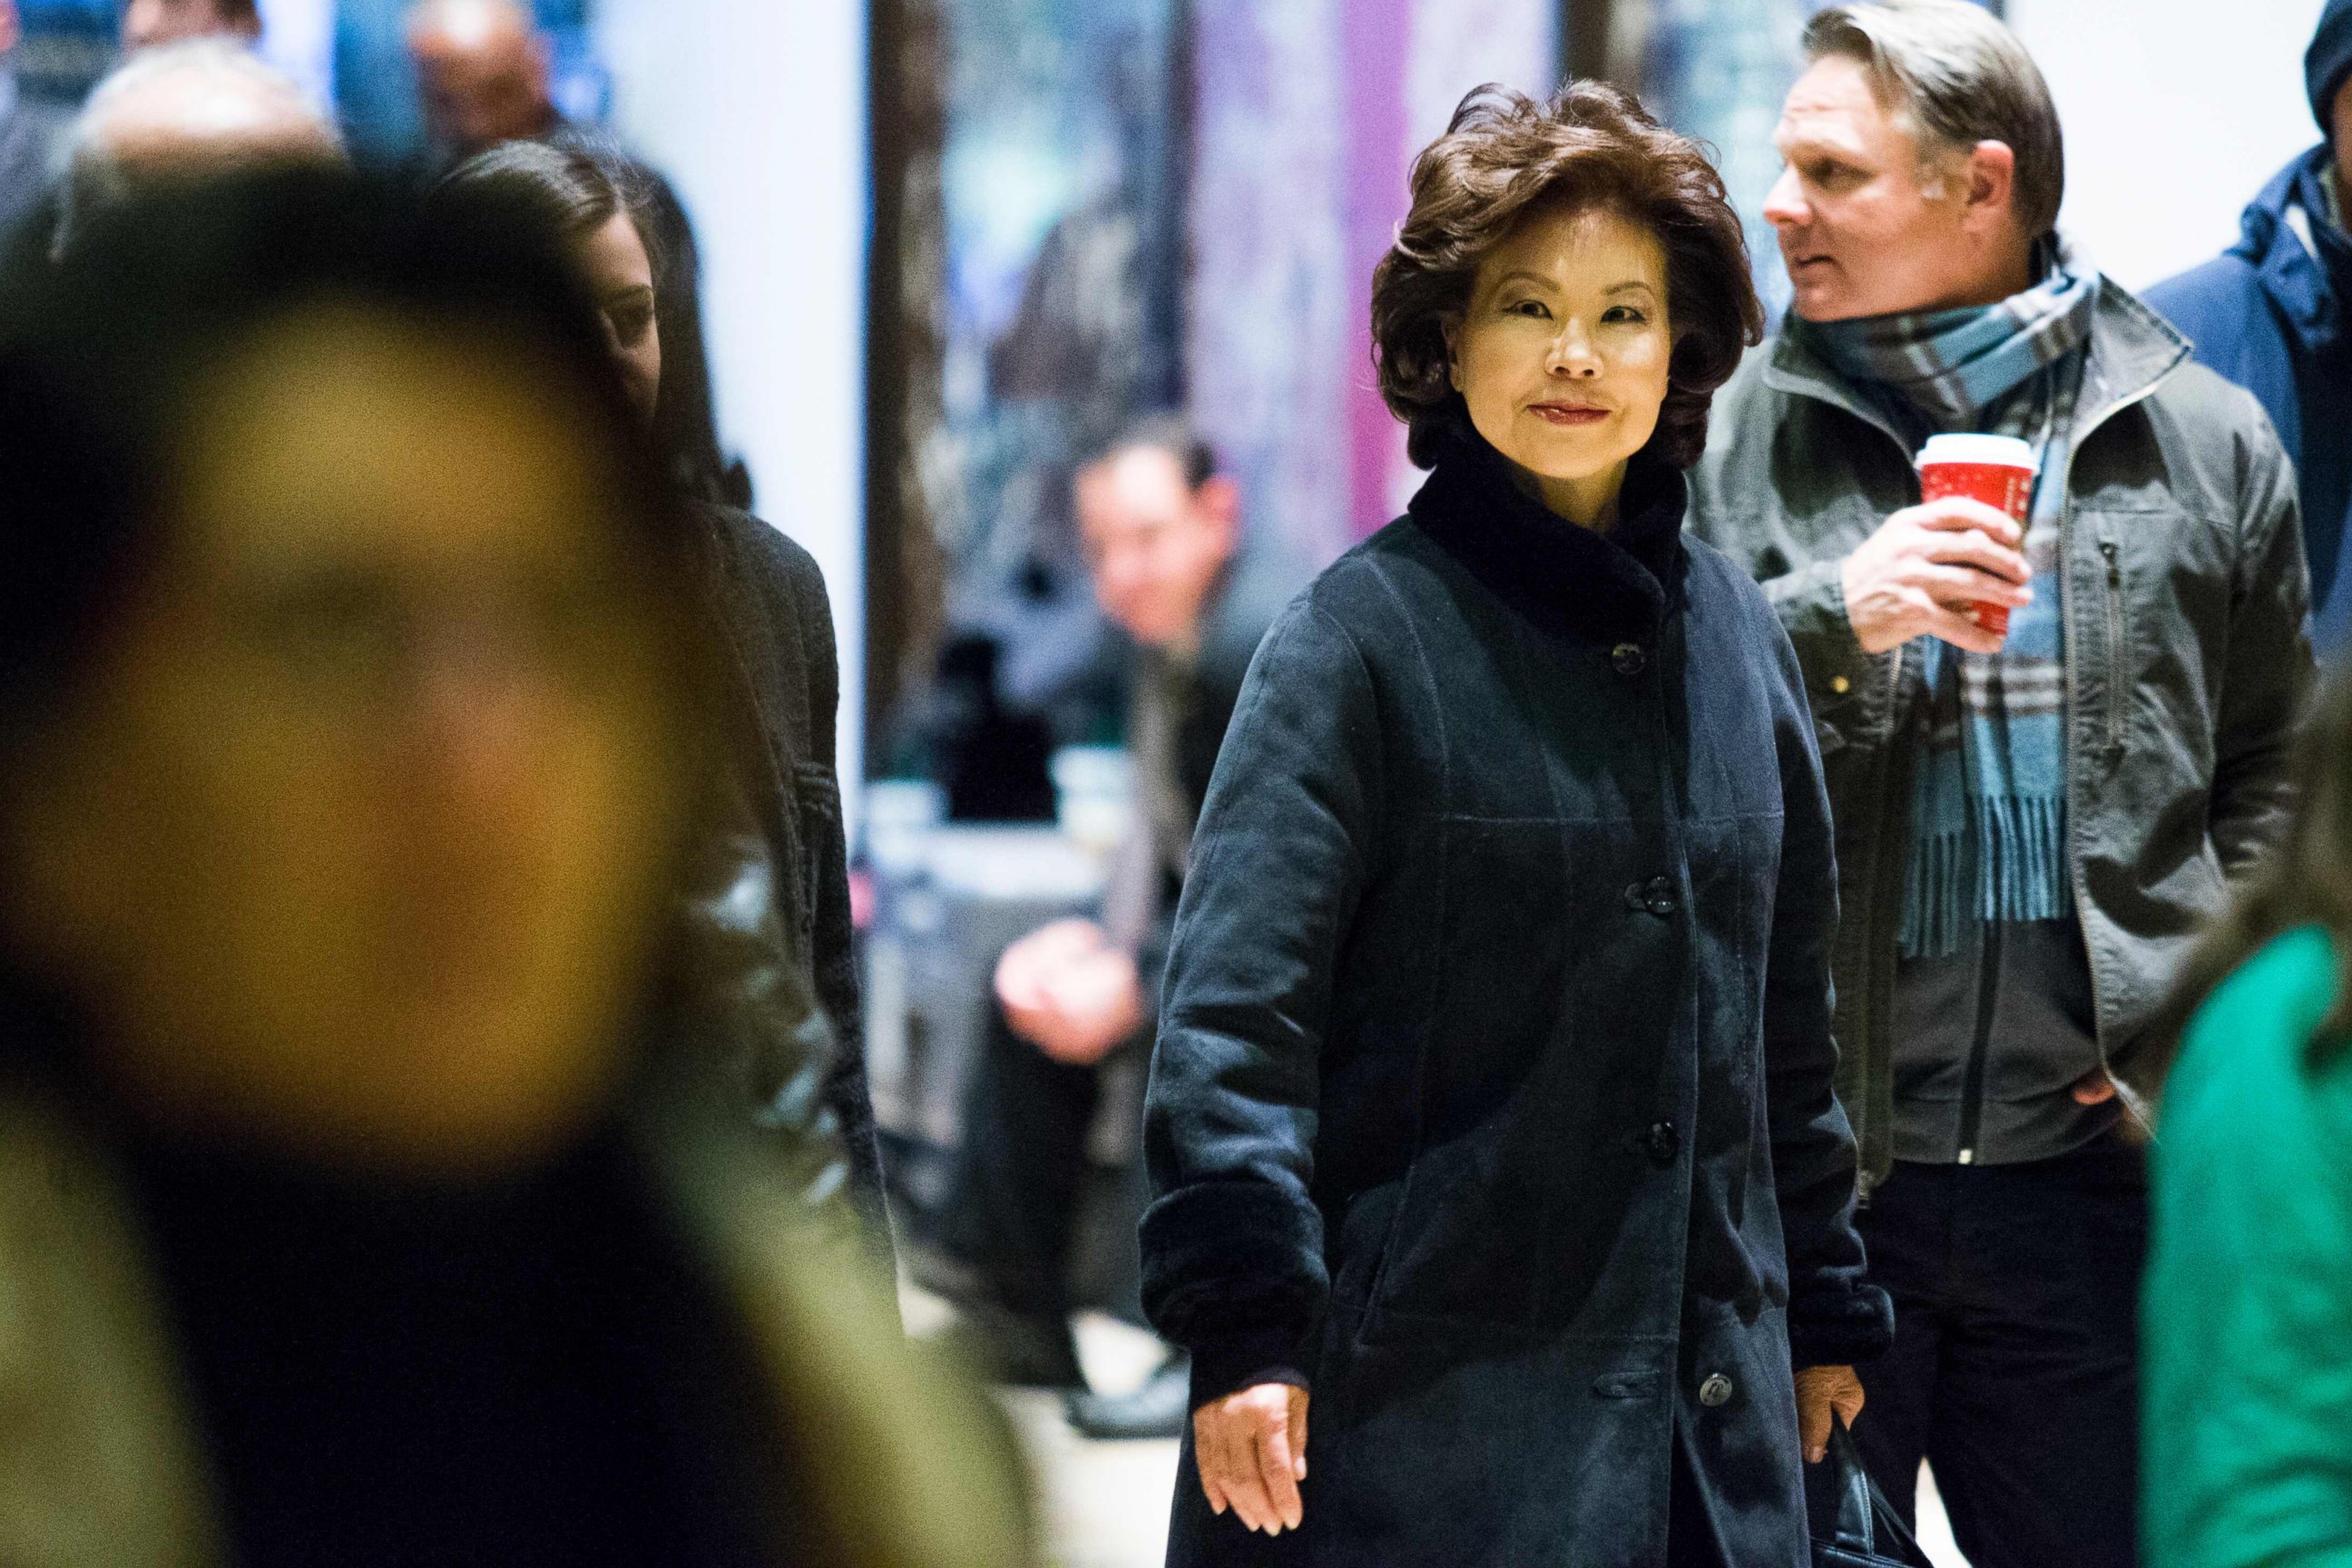 PHOTO: Former U.S. Secretary of Labor Elaine Chao arrives at Trump Tower on another day of meetings scheduled with President-elect Donald Trump on Nov. 21, 2016 in New York.